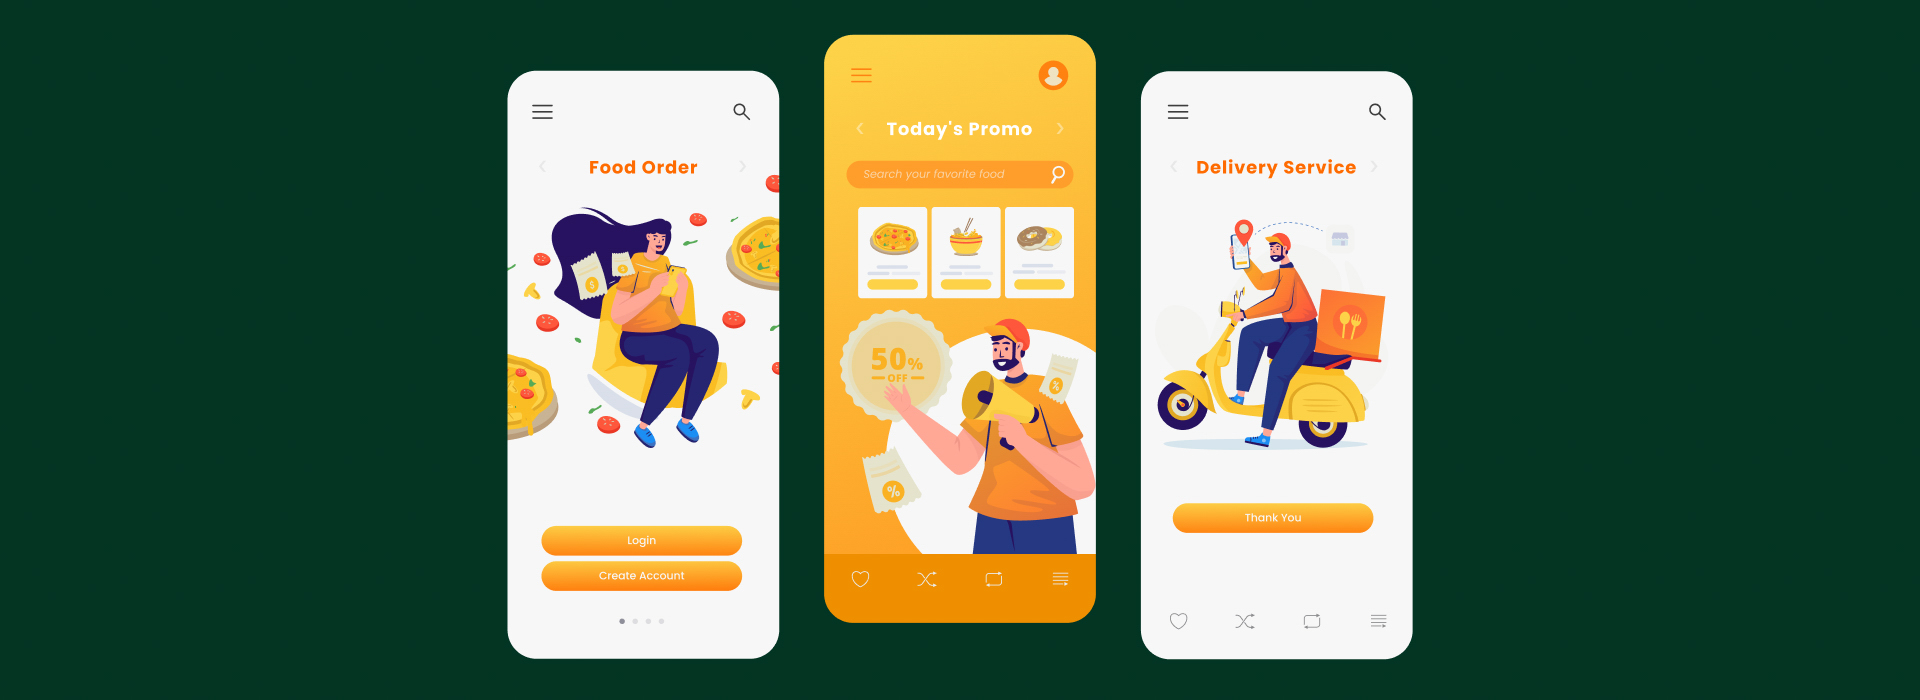 How to Develop a Backend for a Food Delivery App